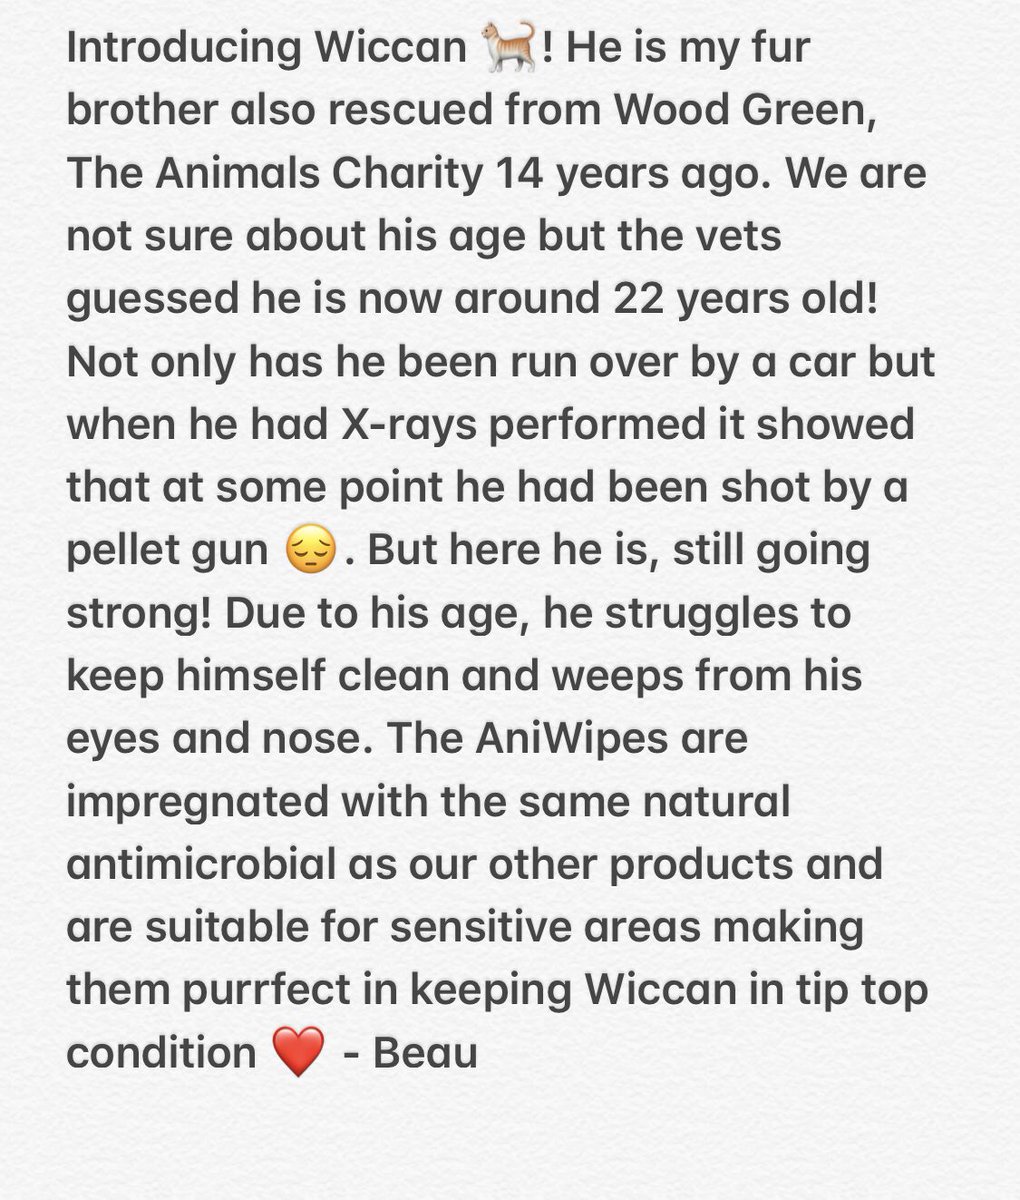 Introducing Wiccan!

#petcare #woundcare #antimicrobial #petfirstaid #norwegianspruce #cat #rescuecat #oldcat #newproduct #natural #animalcare #blackcat #vet #purfect #furfamily @Wood_Green